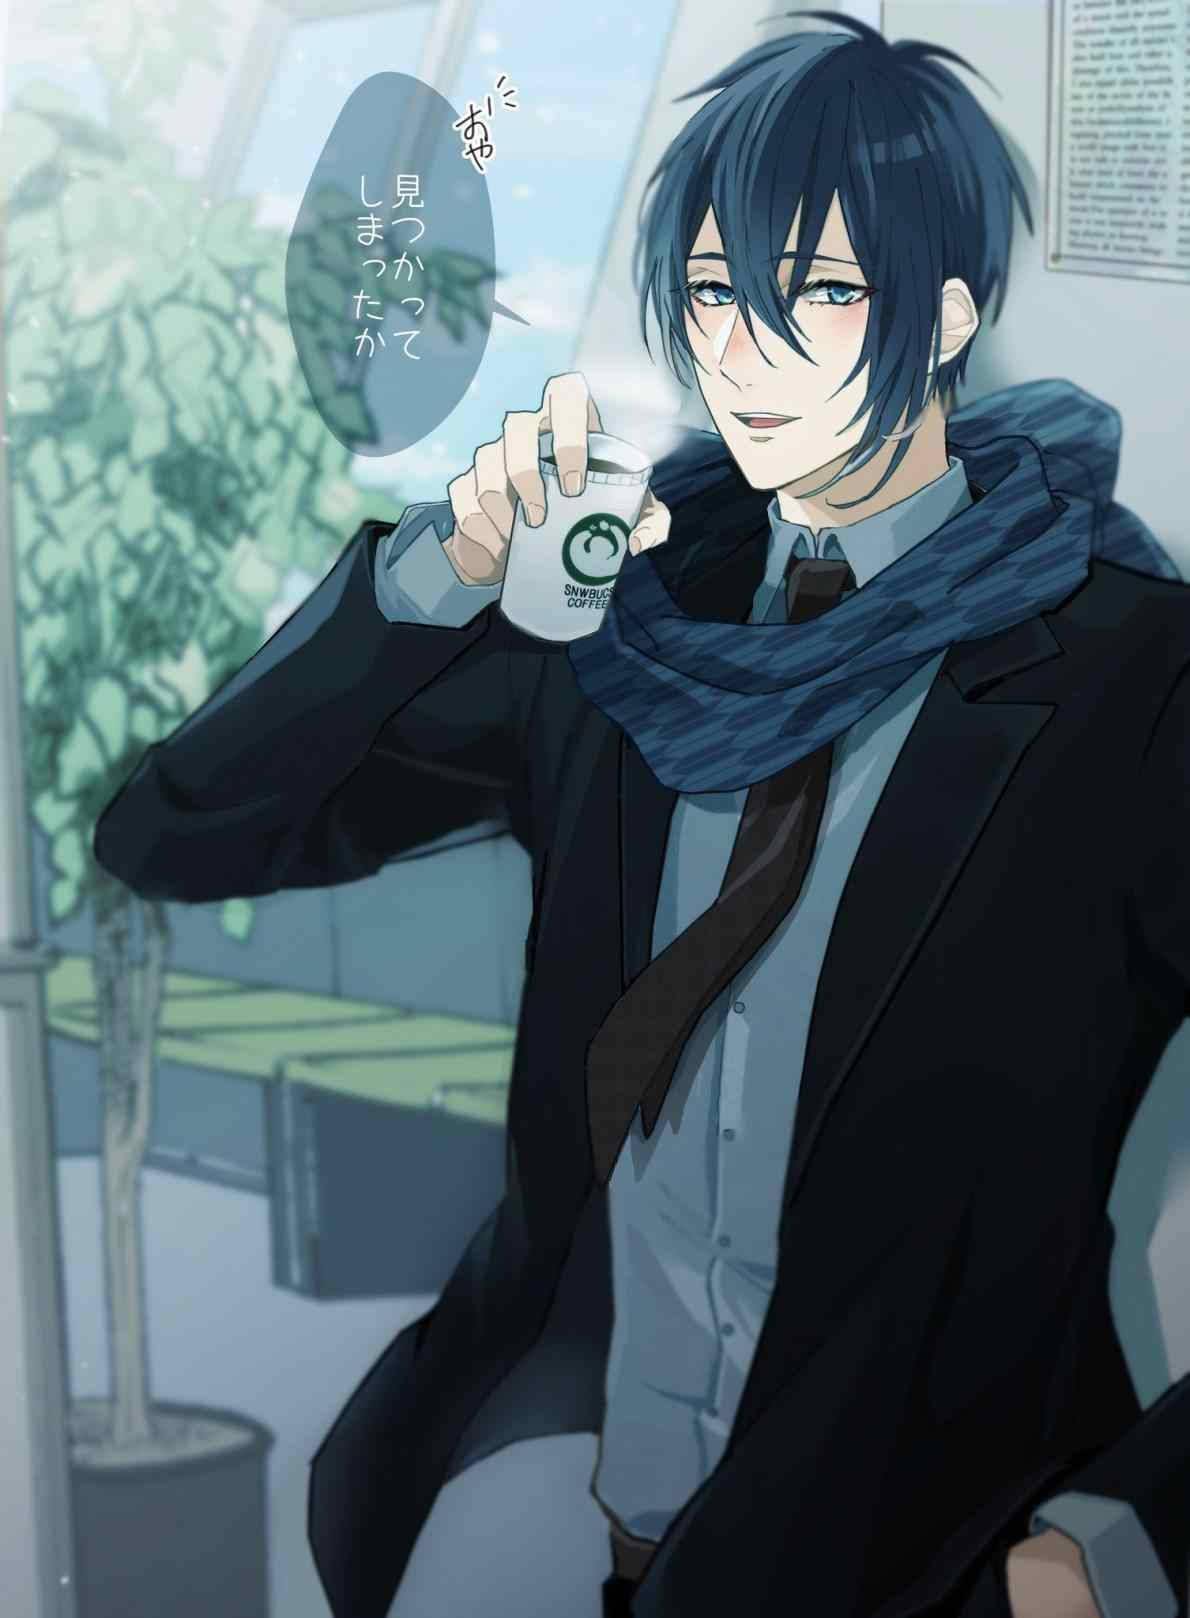 Handsome Anime Boy With Hot Coffee Wallpaper